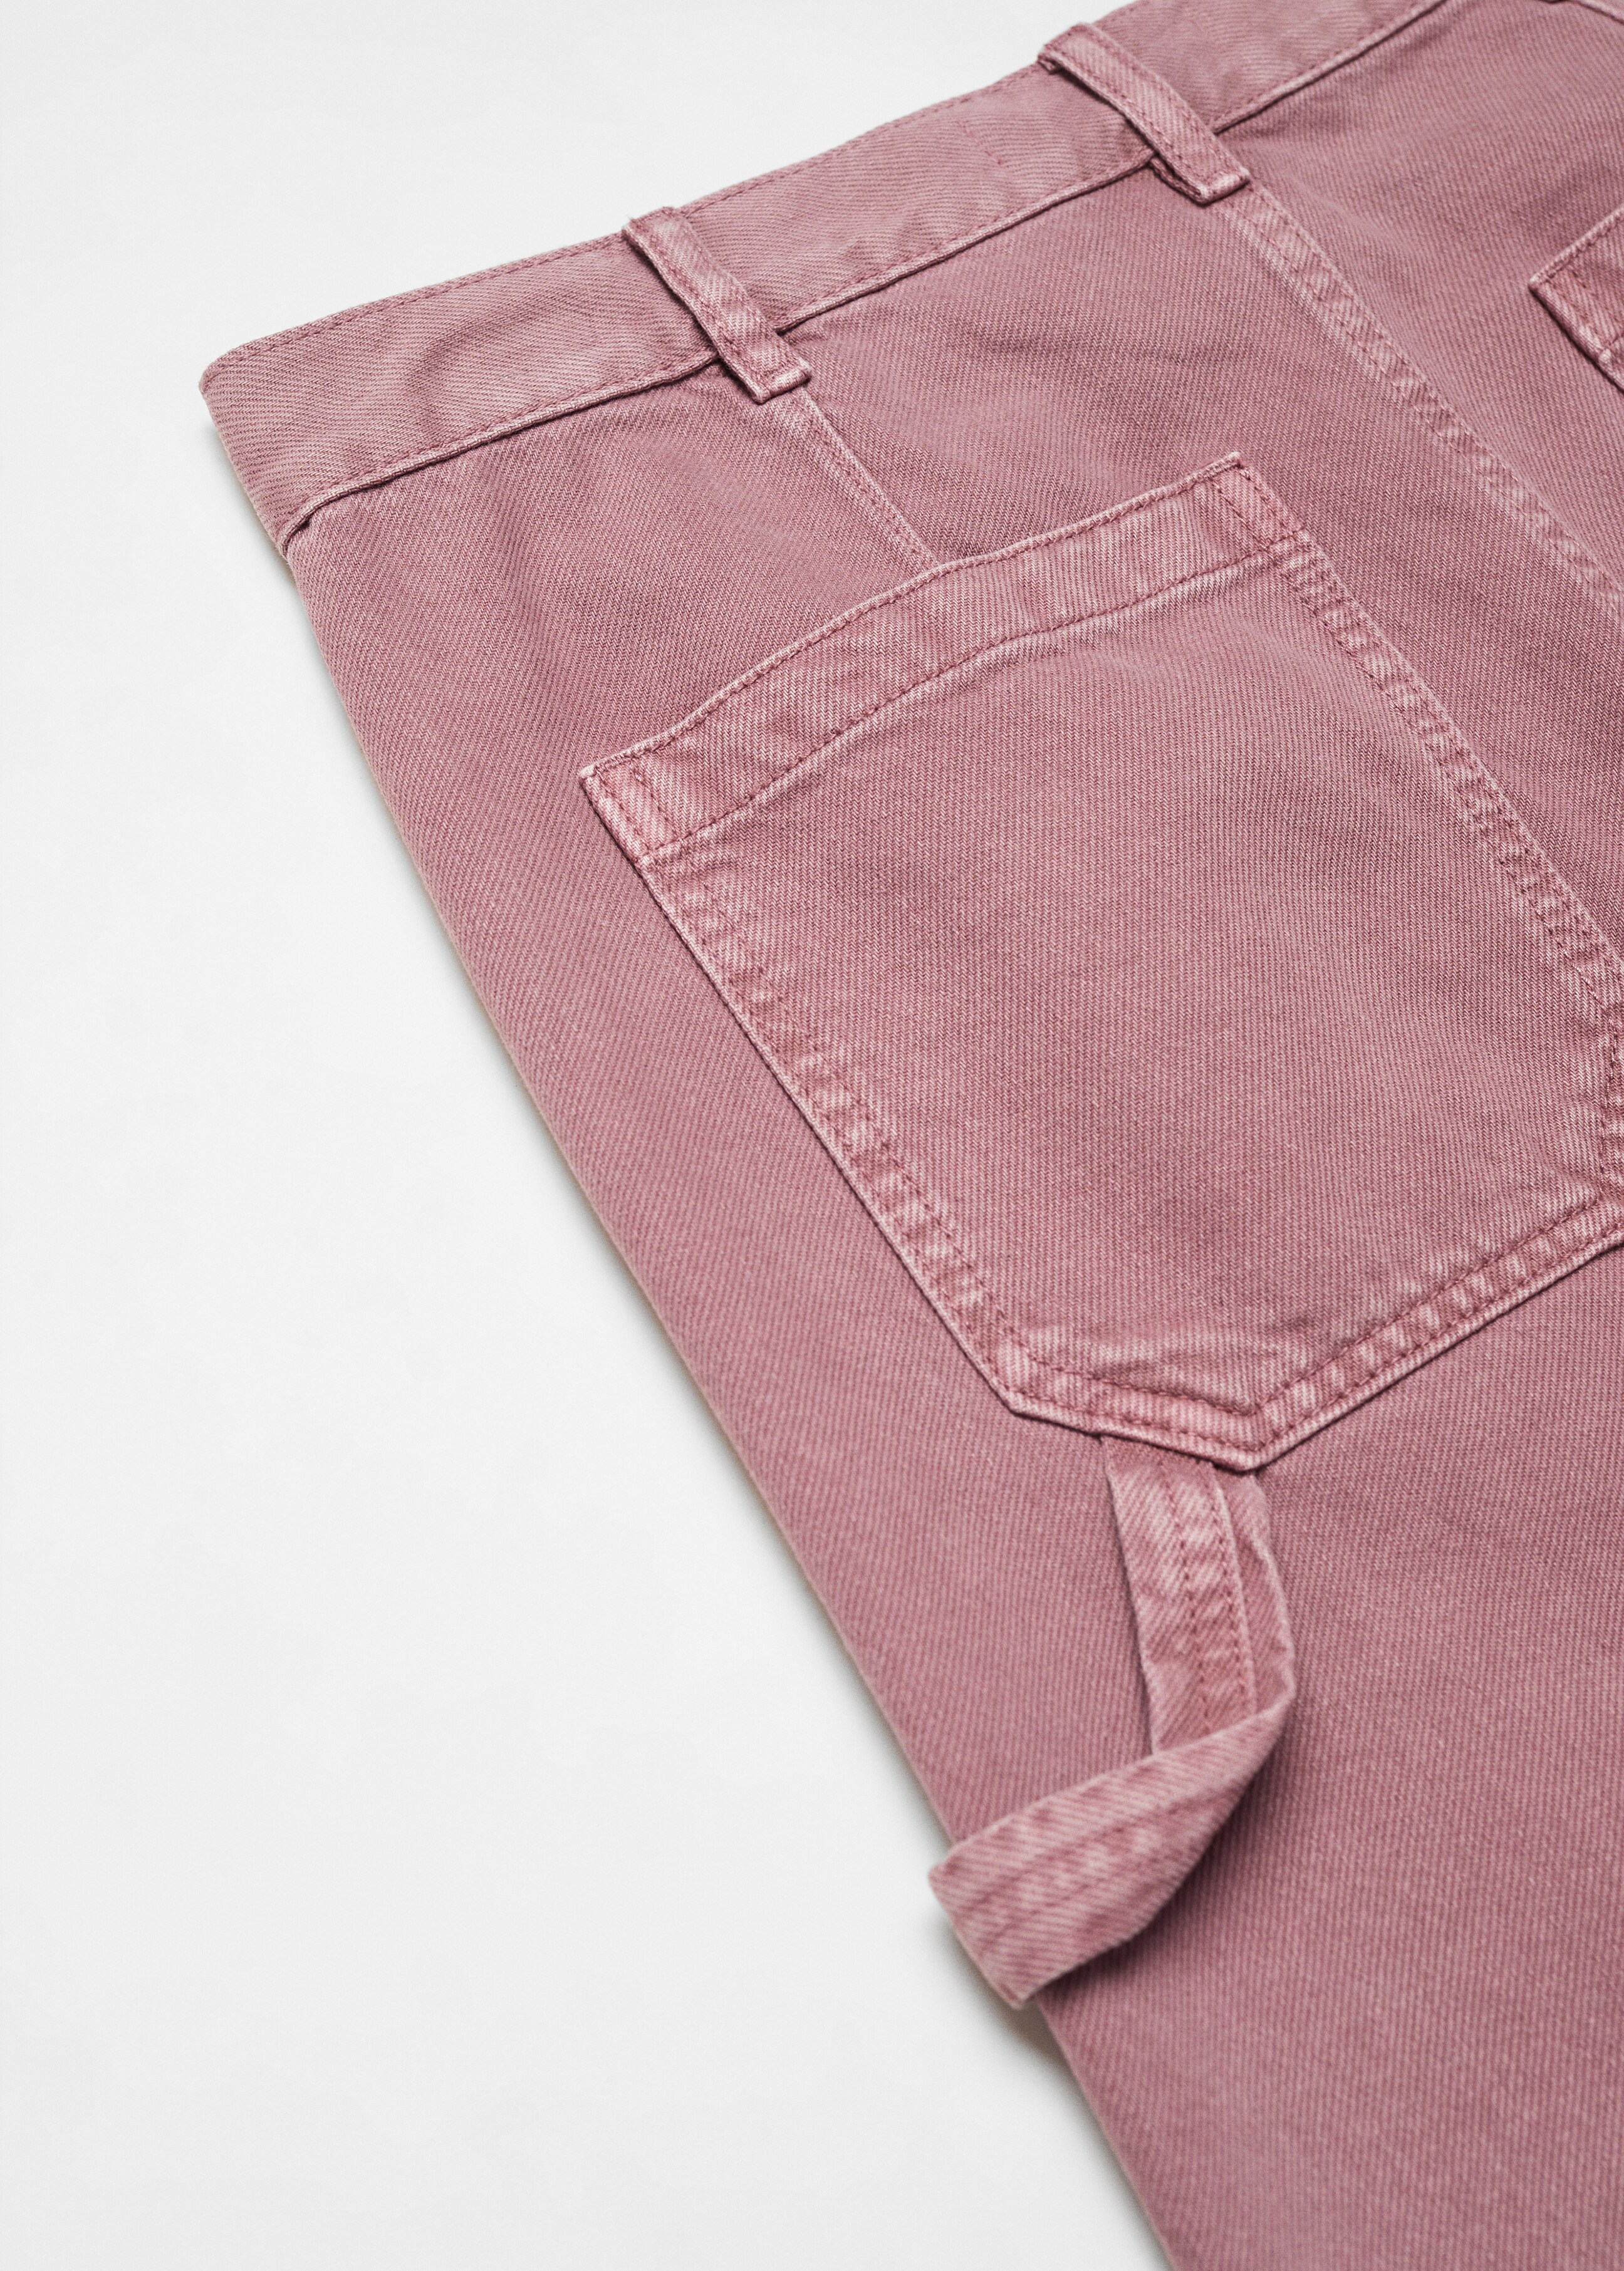 Carpenter cargo jeans - Details of the article 8